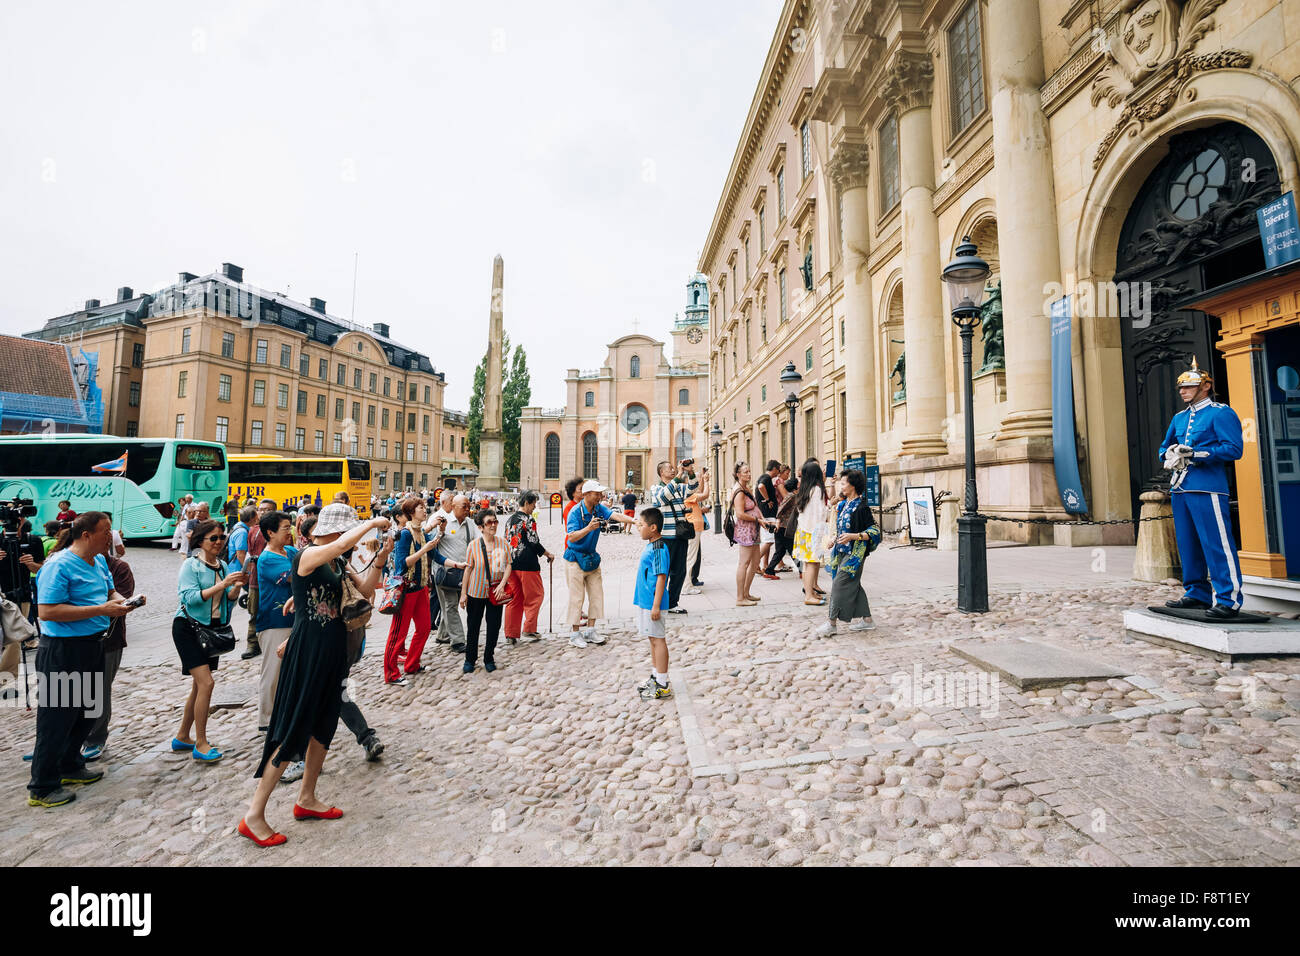 STOCKHOLM, SWEDEN - JULY 30, 2014: Tourists visit and photograph the guard of honor at the Royal palace in Gamla Stan, where kin Stock Photo